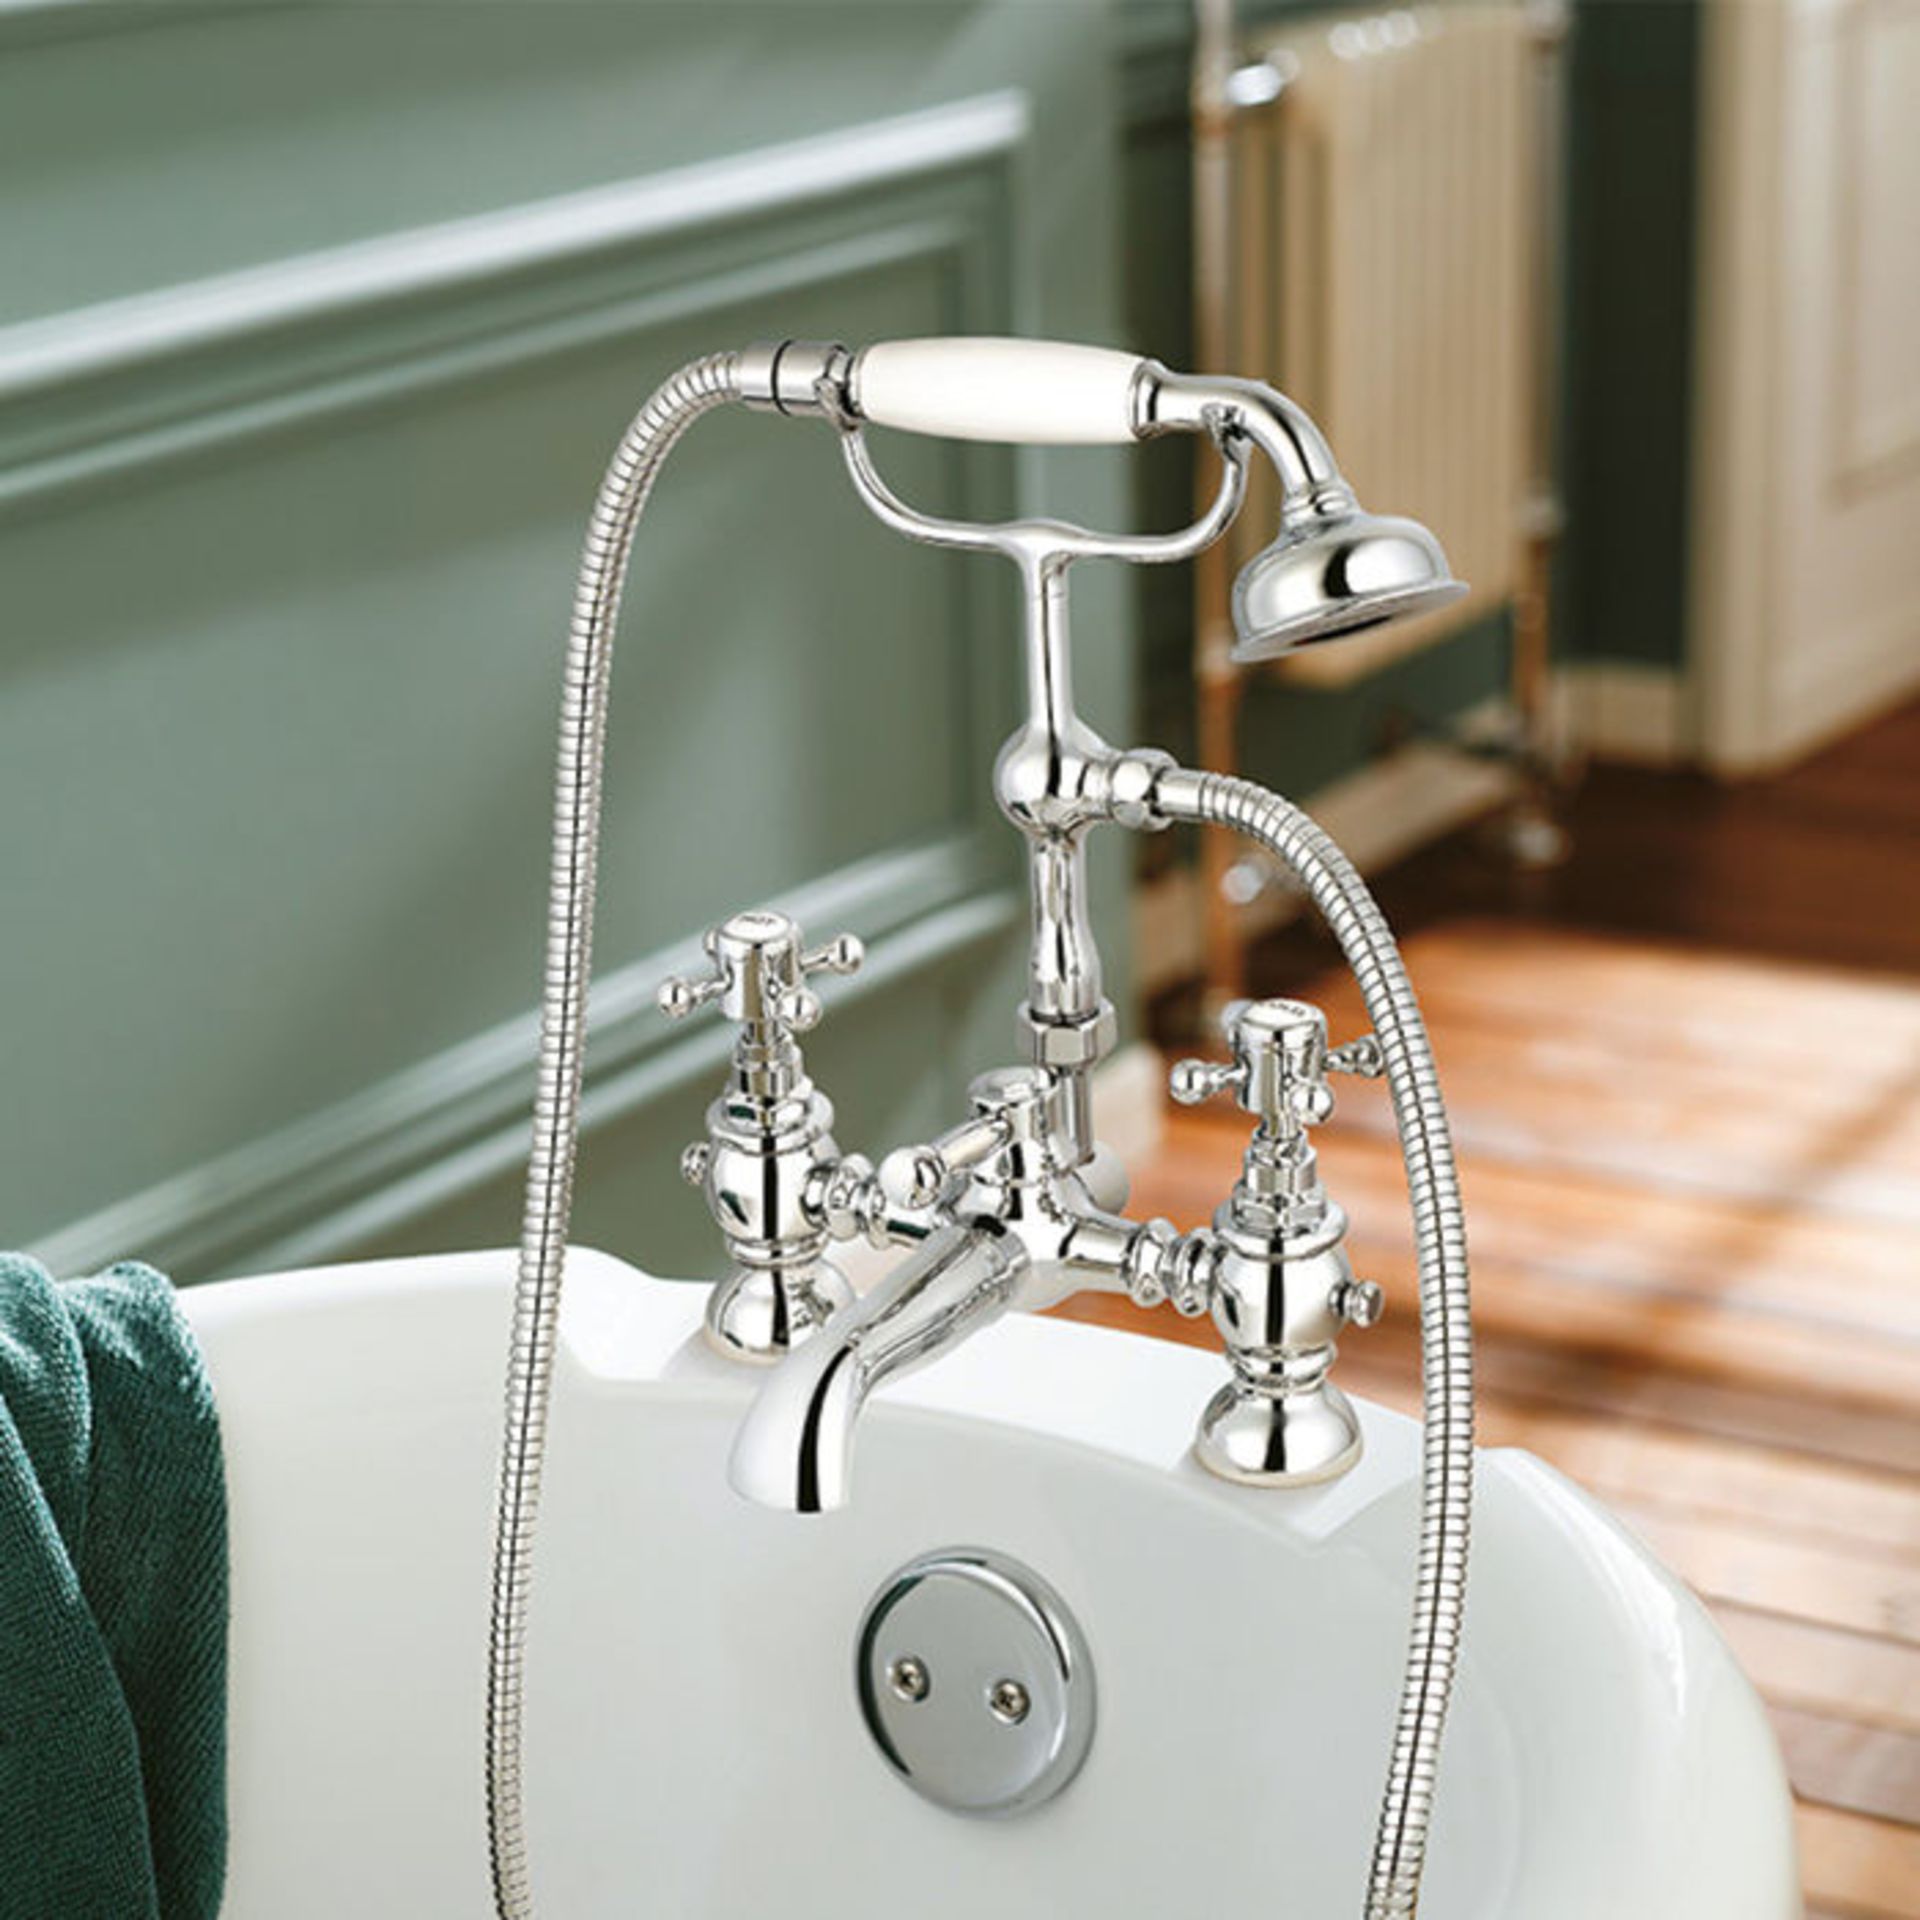 (PT222) Cambridge Bath Shower Mixer - Traditional Tap with Handheld Shower We love this because it